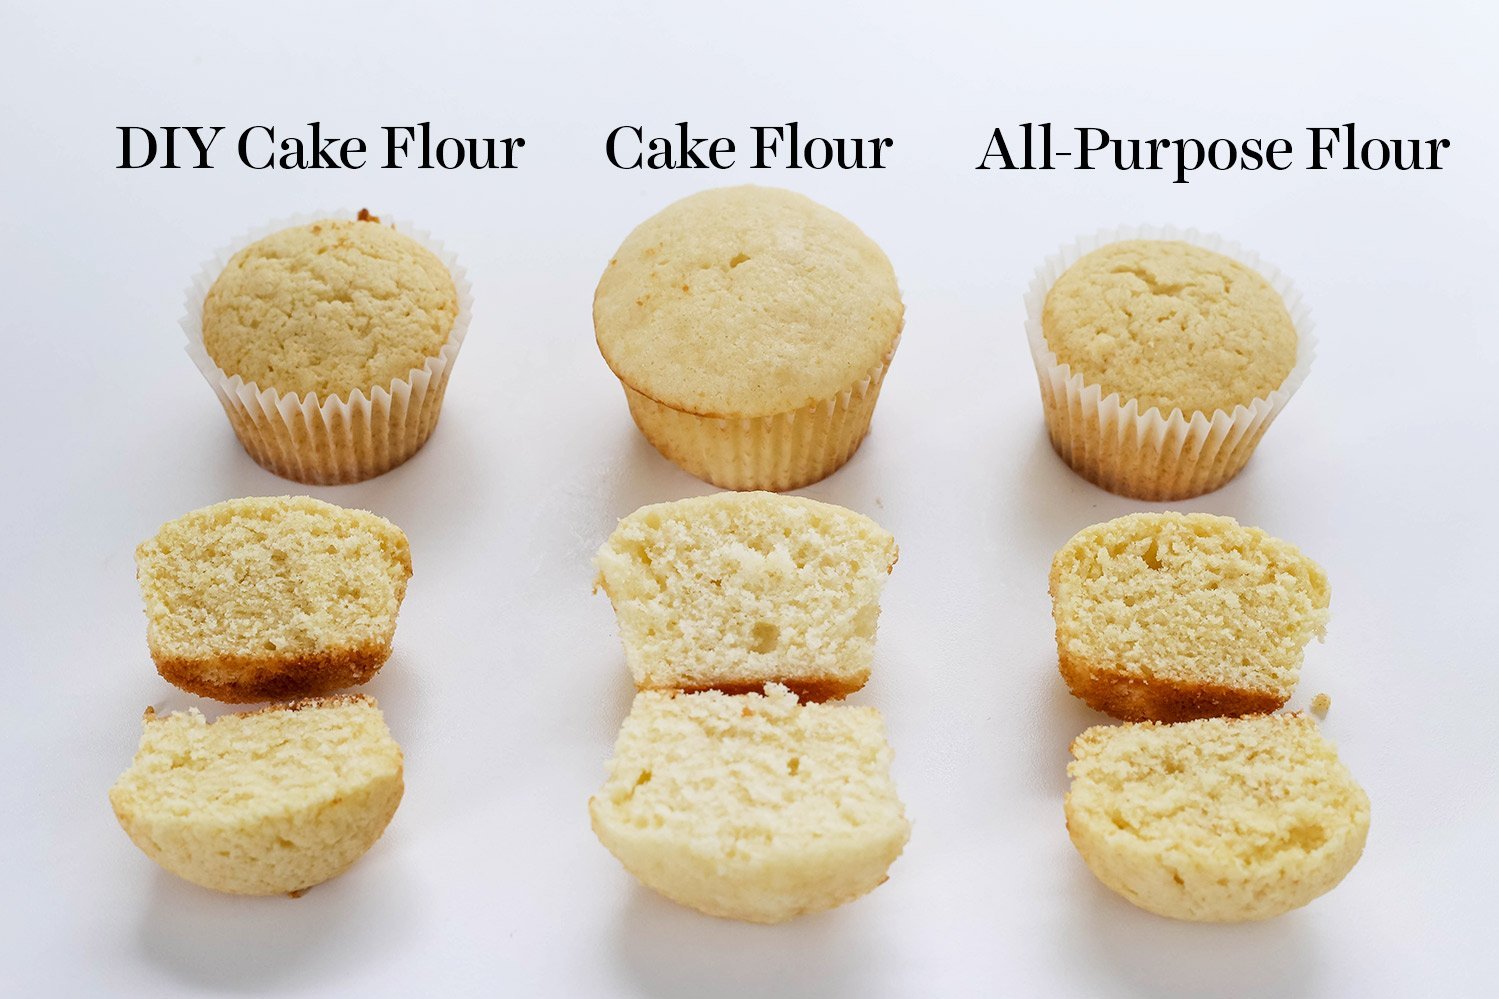 Diving into Cake Flour 101 - A fun visual guide to cake flour including what it is, how to substitute, and side-by-side comparisons so you can see how it works in action!